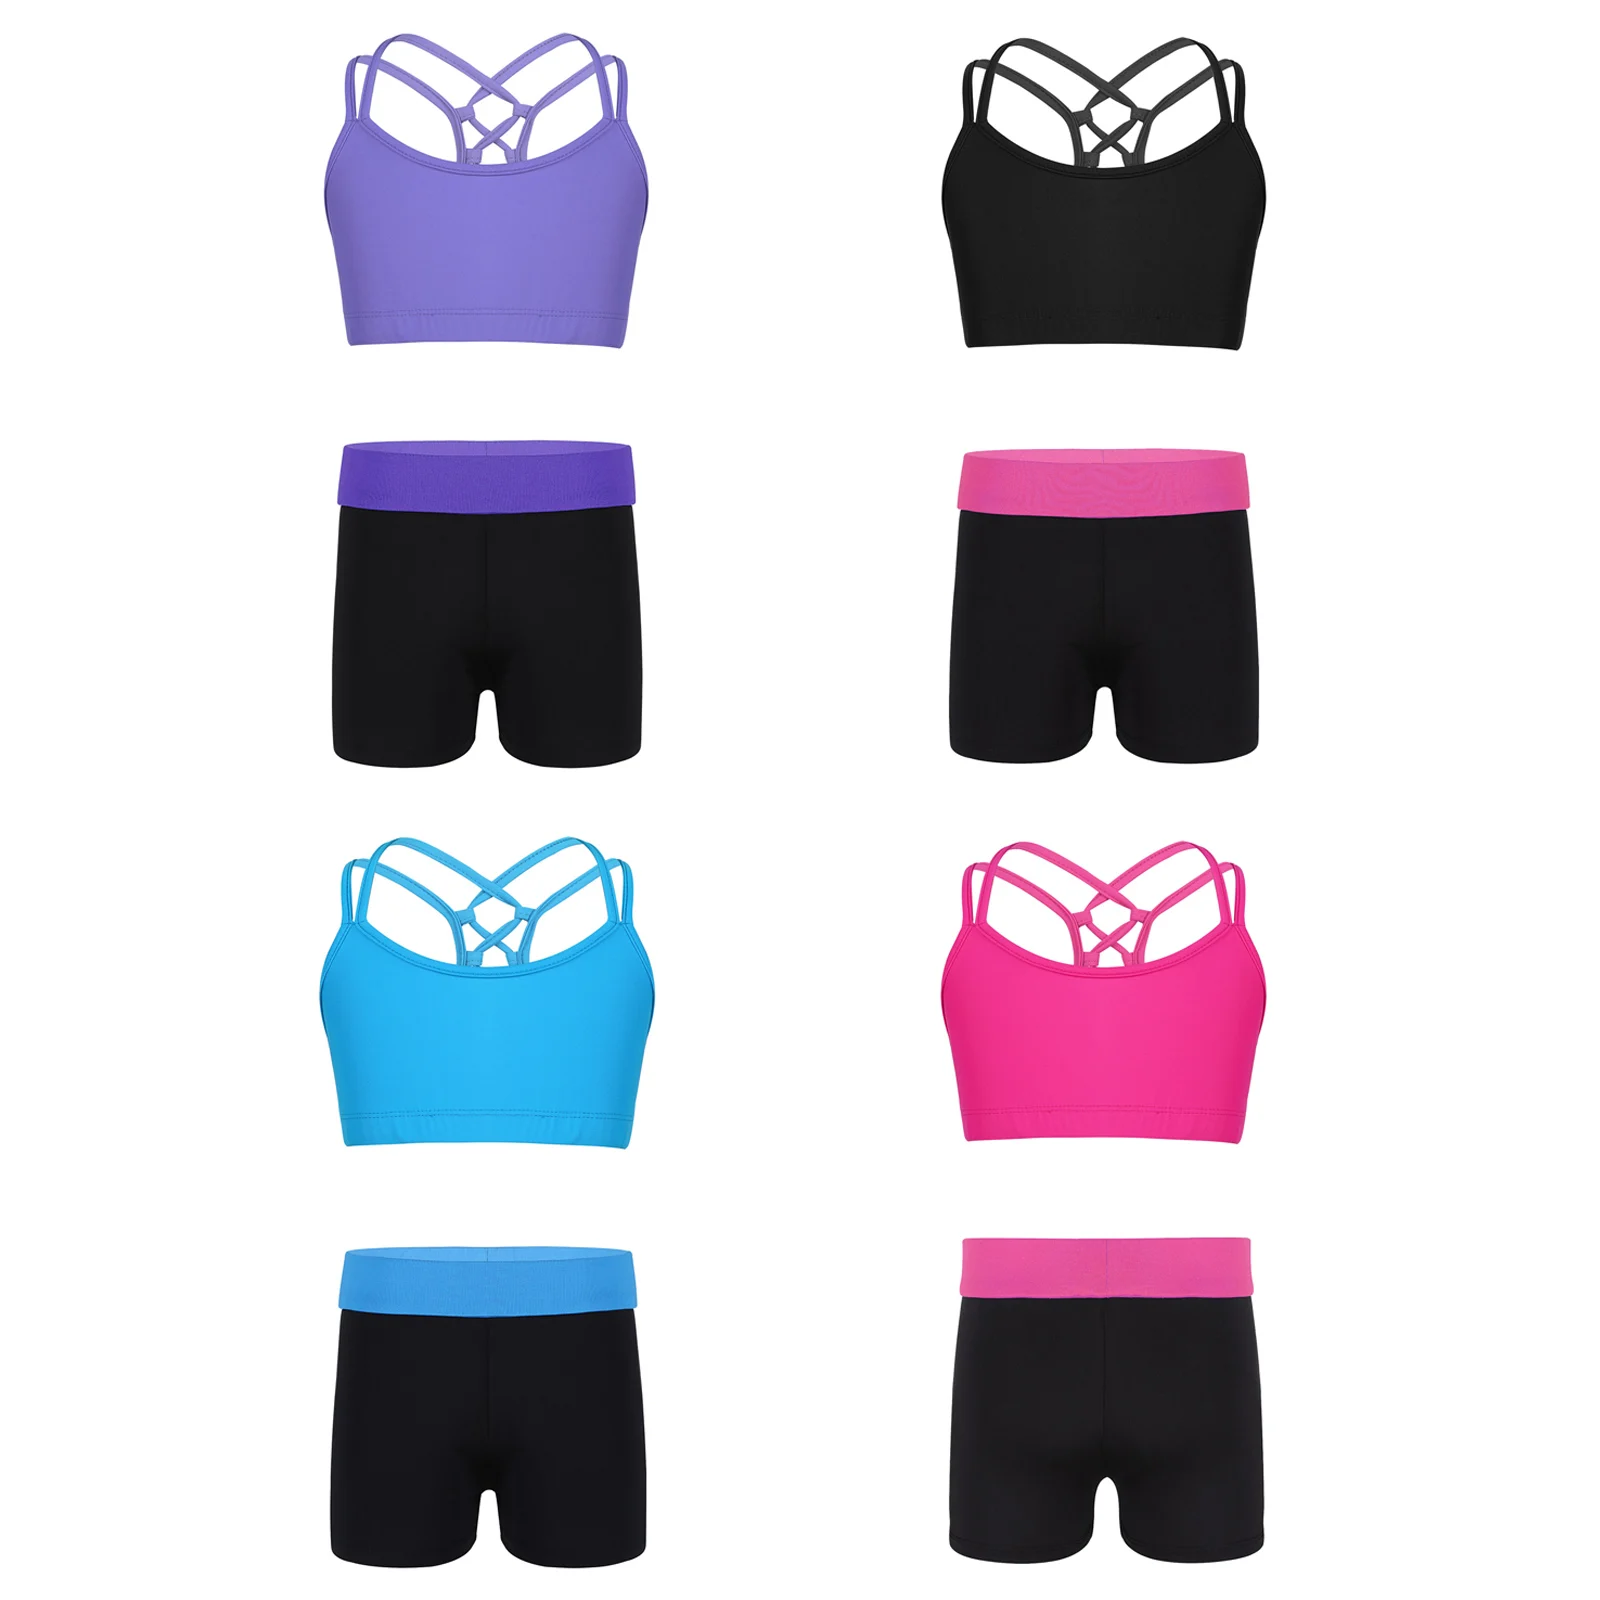 

Kids Girls Ballet Leotard Strappy Crop Top + Shorts Outfit Set for Gymnastics Workout Yoga Sport Dance Stage Performance Clothes